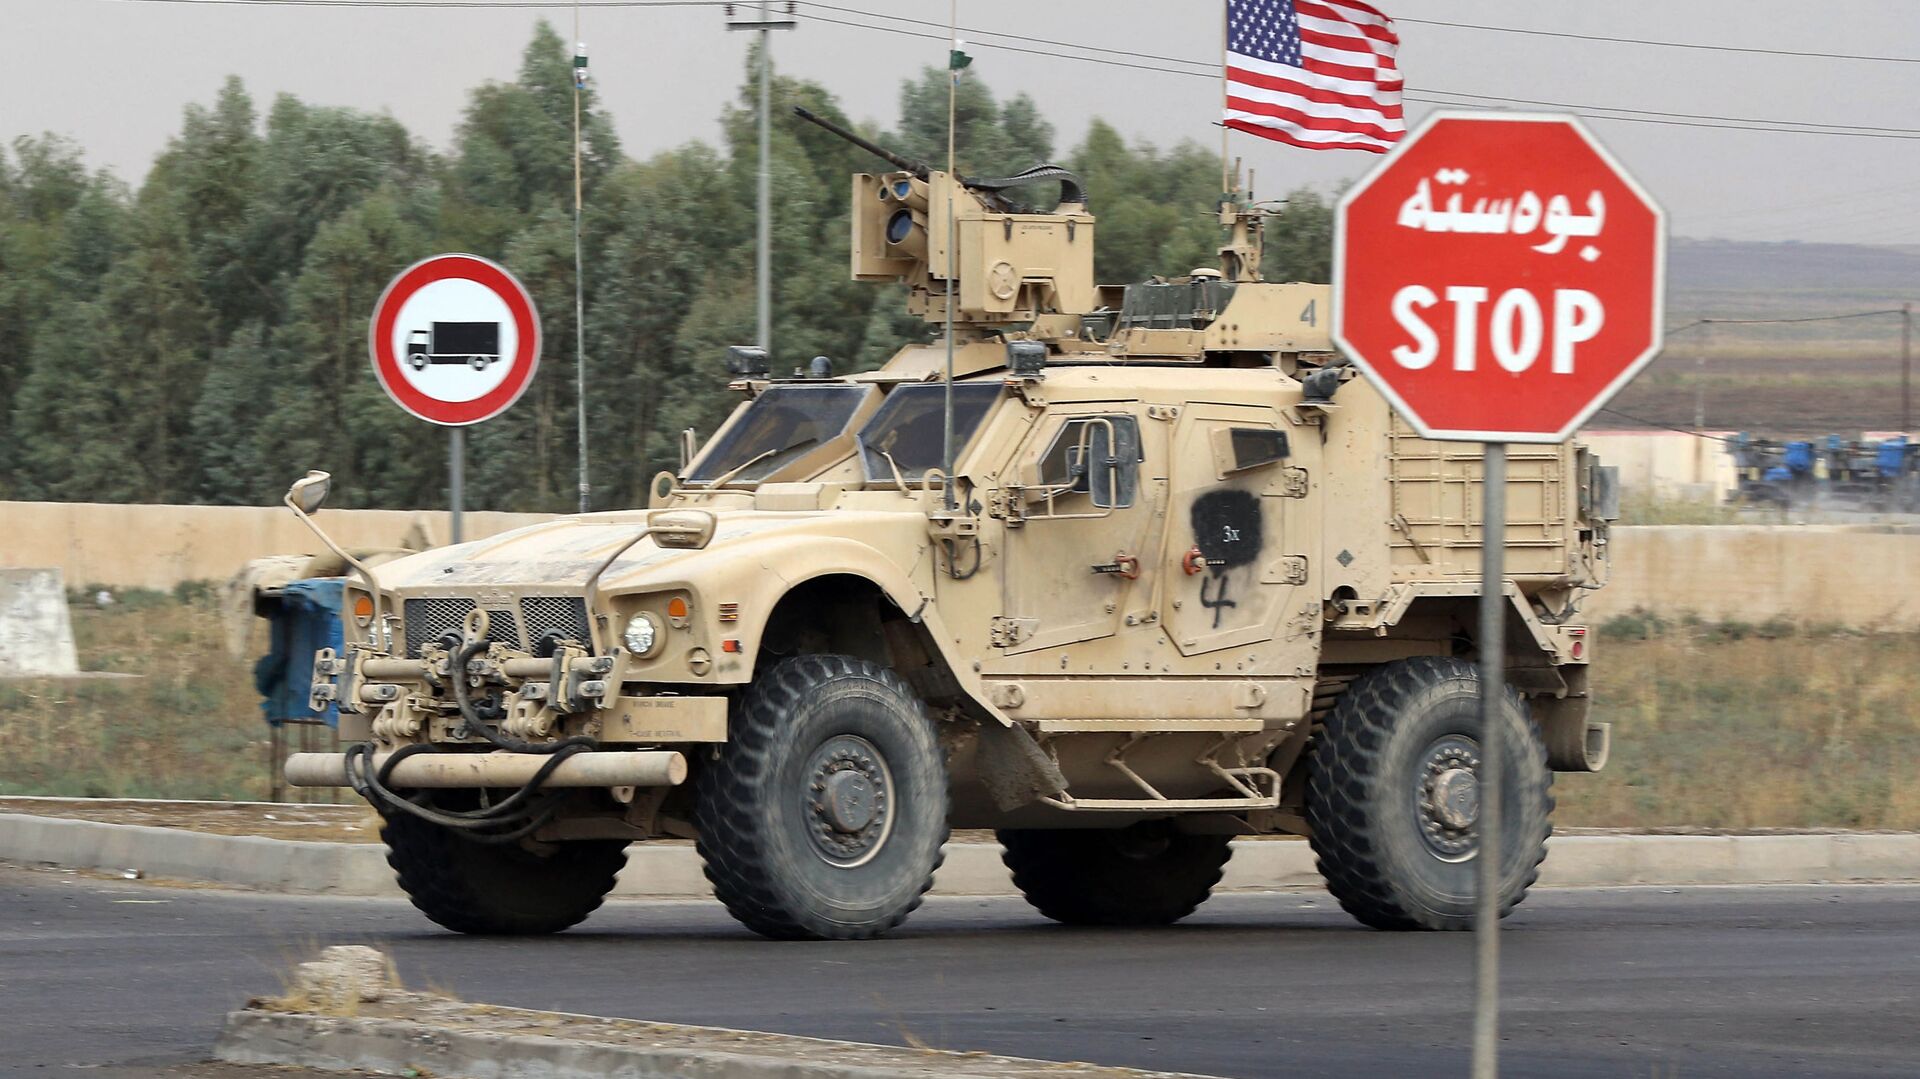 A US military vehicle, part of a convoy, arrives near the Iraqi Kurdish town of Bardarash in the Dohuk governorate after withdrawing from northern Syria on October 21, 2019 - Sputnik International, 1920, 13.05.2021